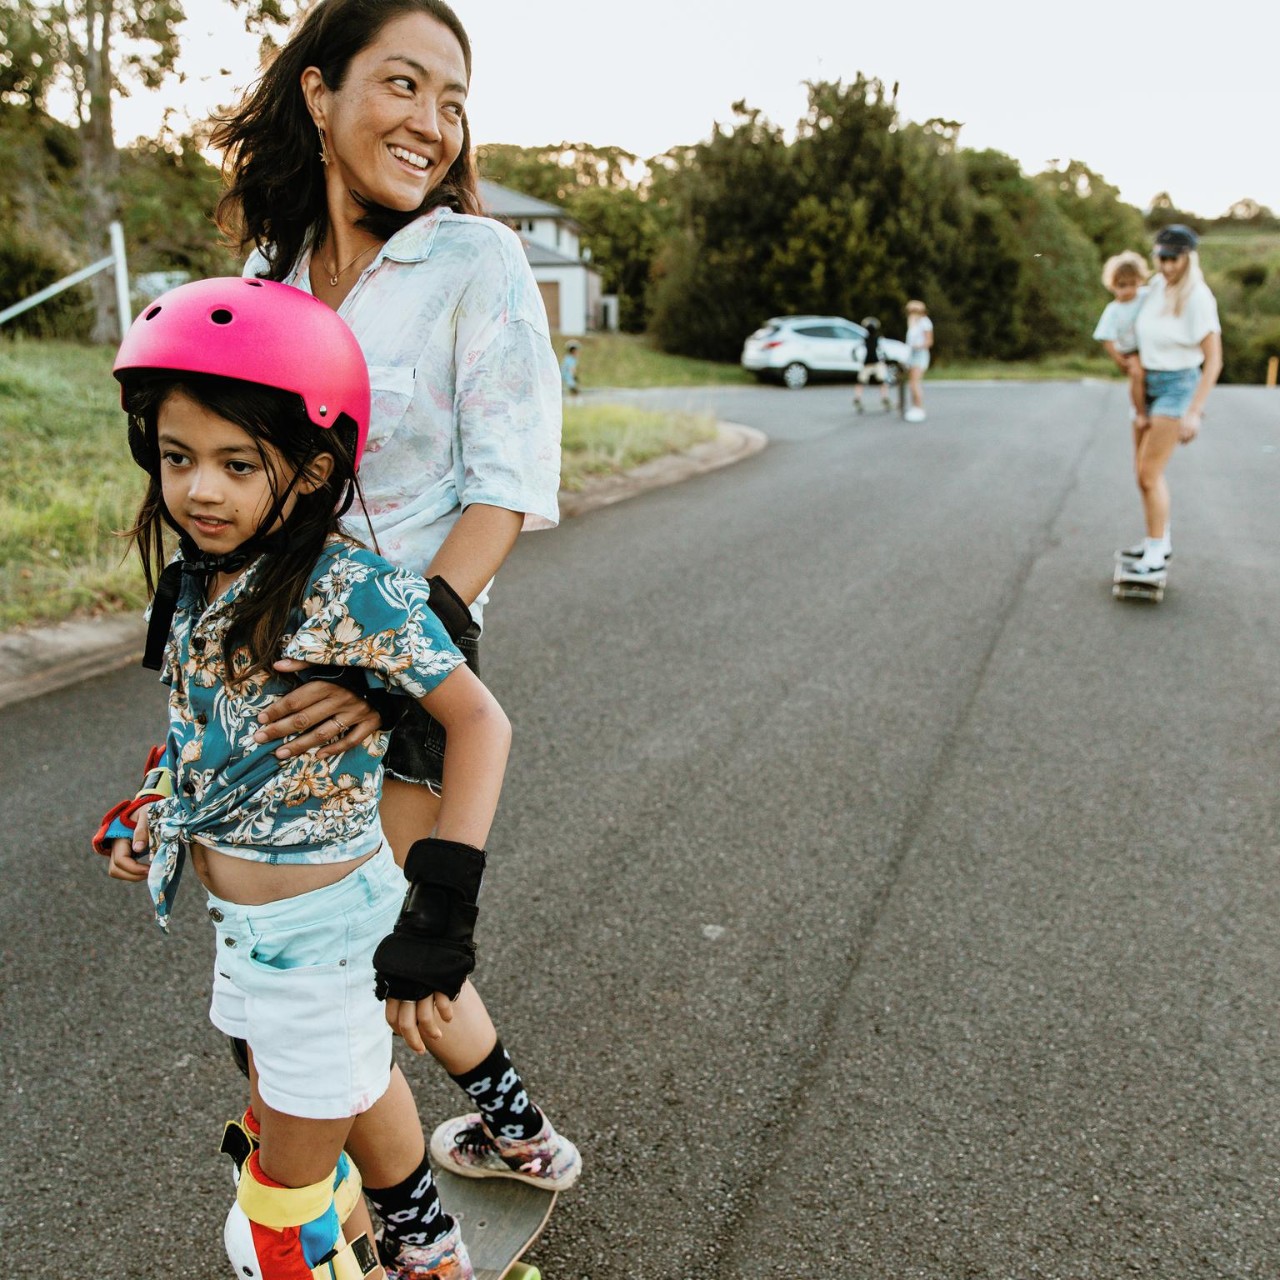 Japanese Aussie mum and daughter skateboard together 